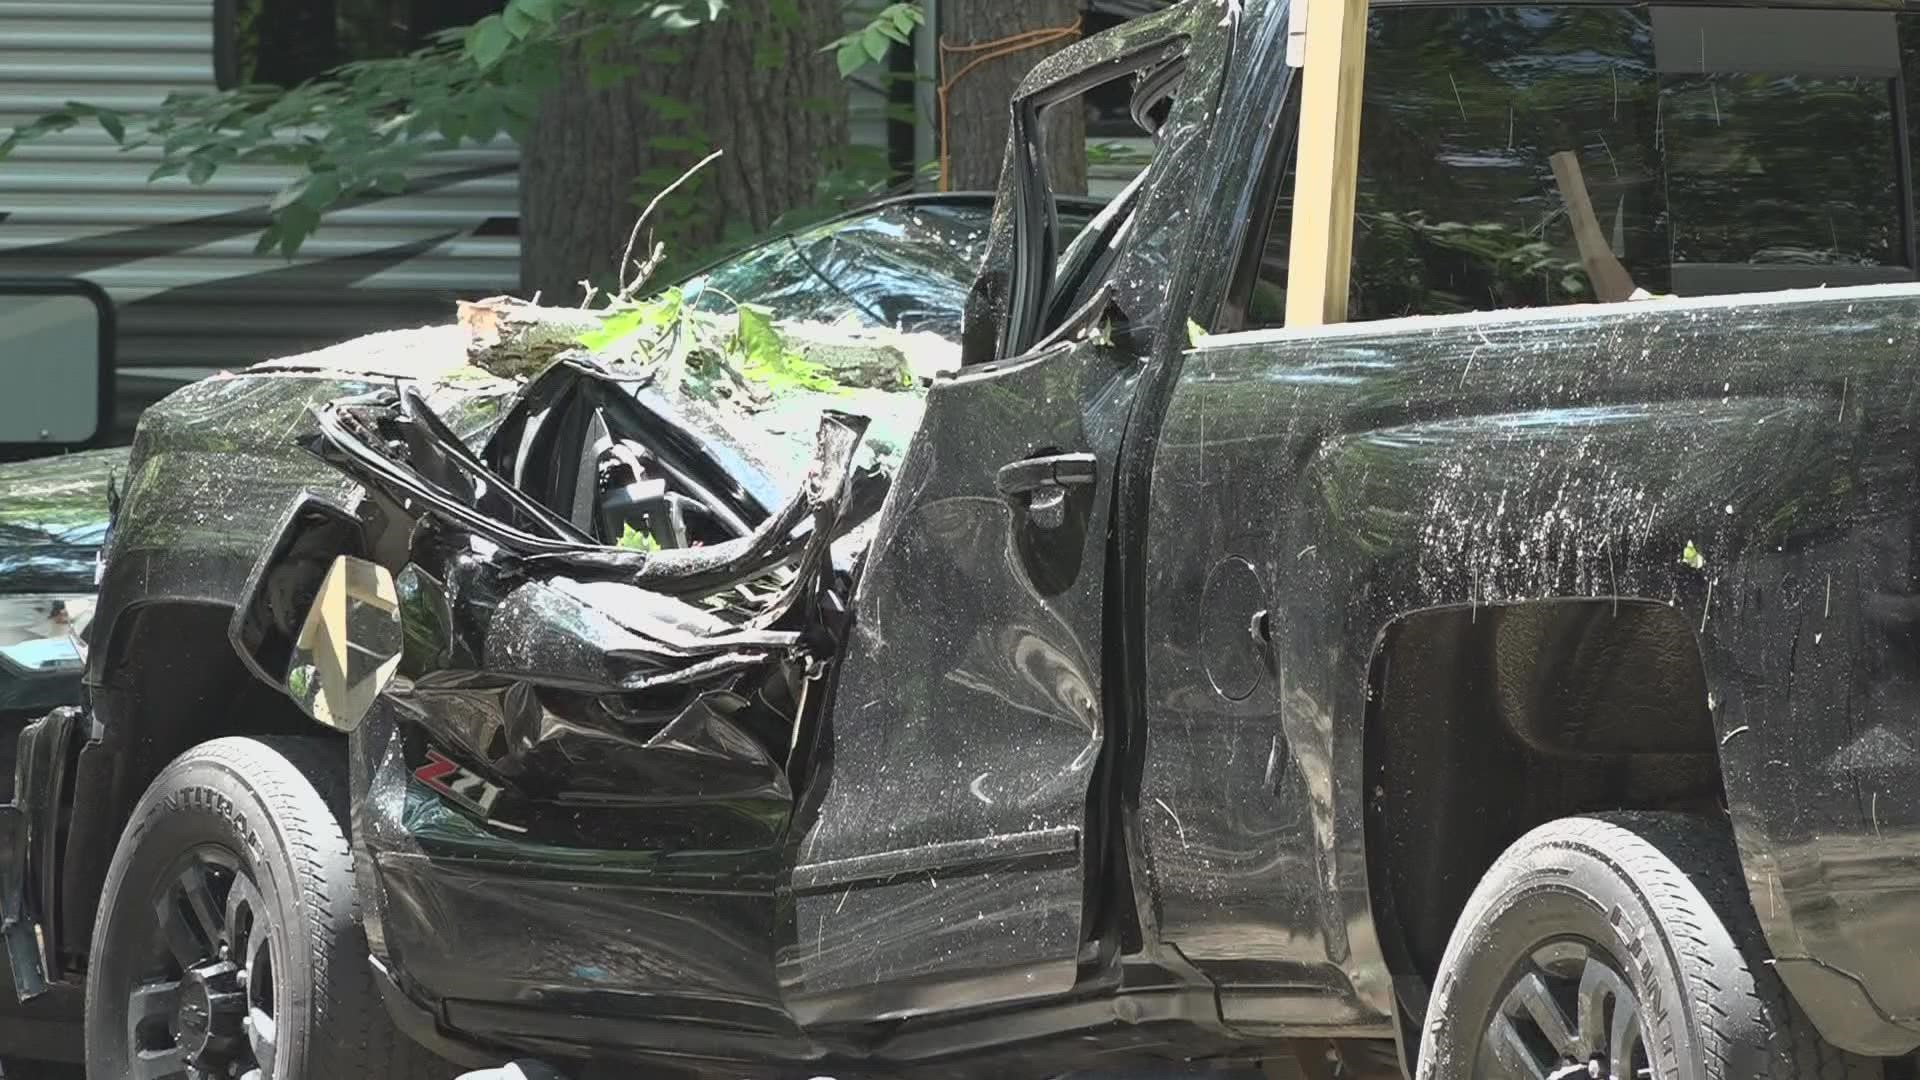 NEWS CENTER Maine's Jackie Mundry reports on the aftermath of Thursday's fatal storm.